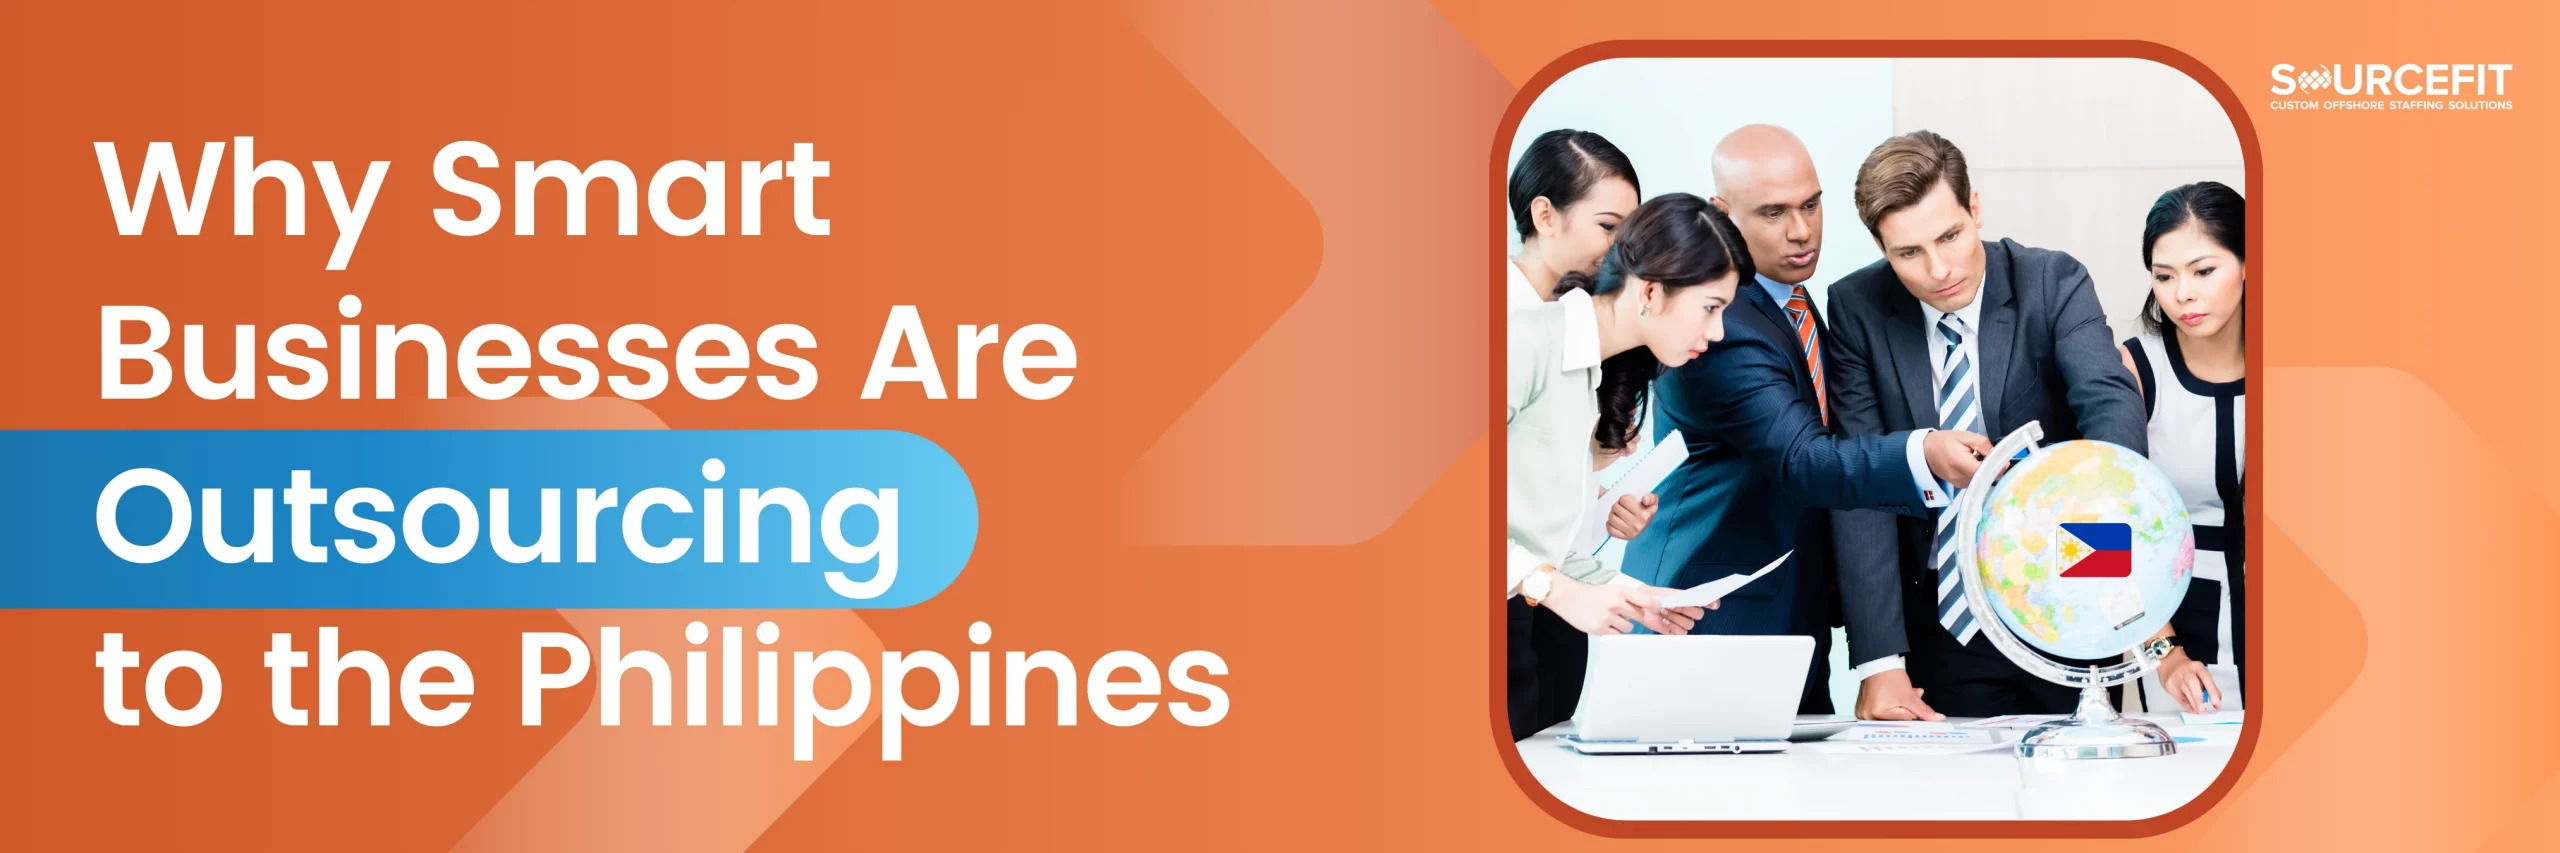 Why-Smart-Businesses-Are-Outsourcing-to-the-Philippines_1200x628-1-1